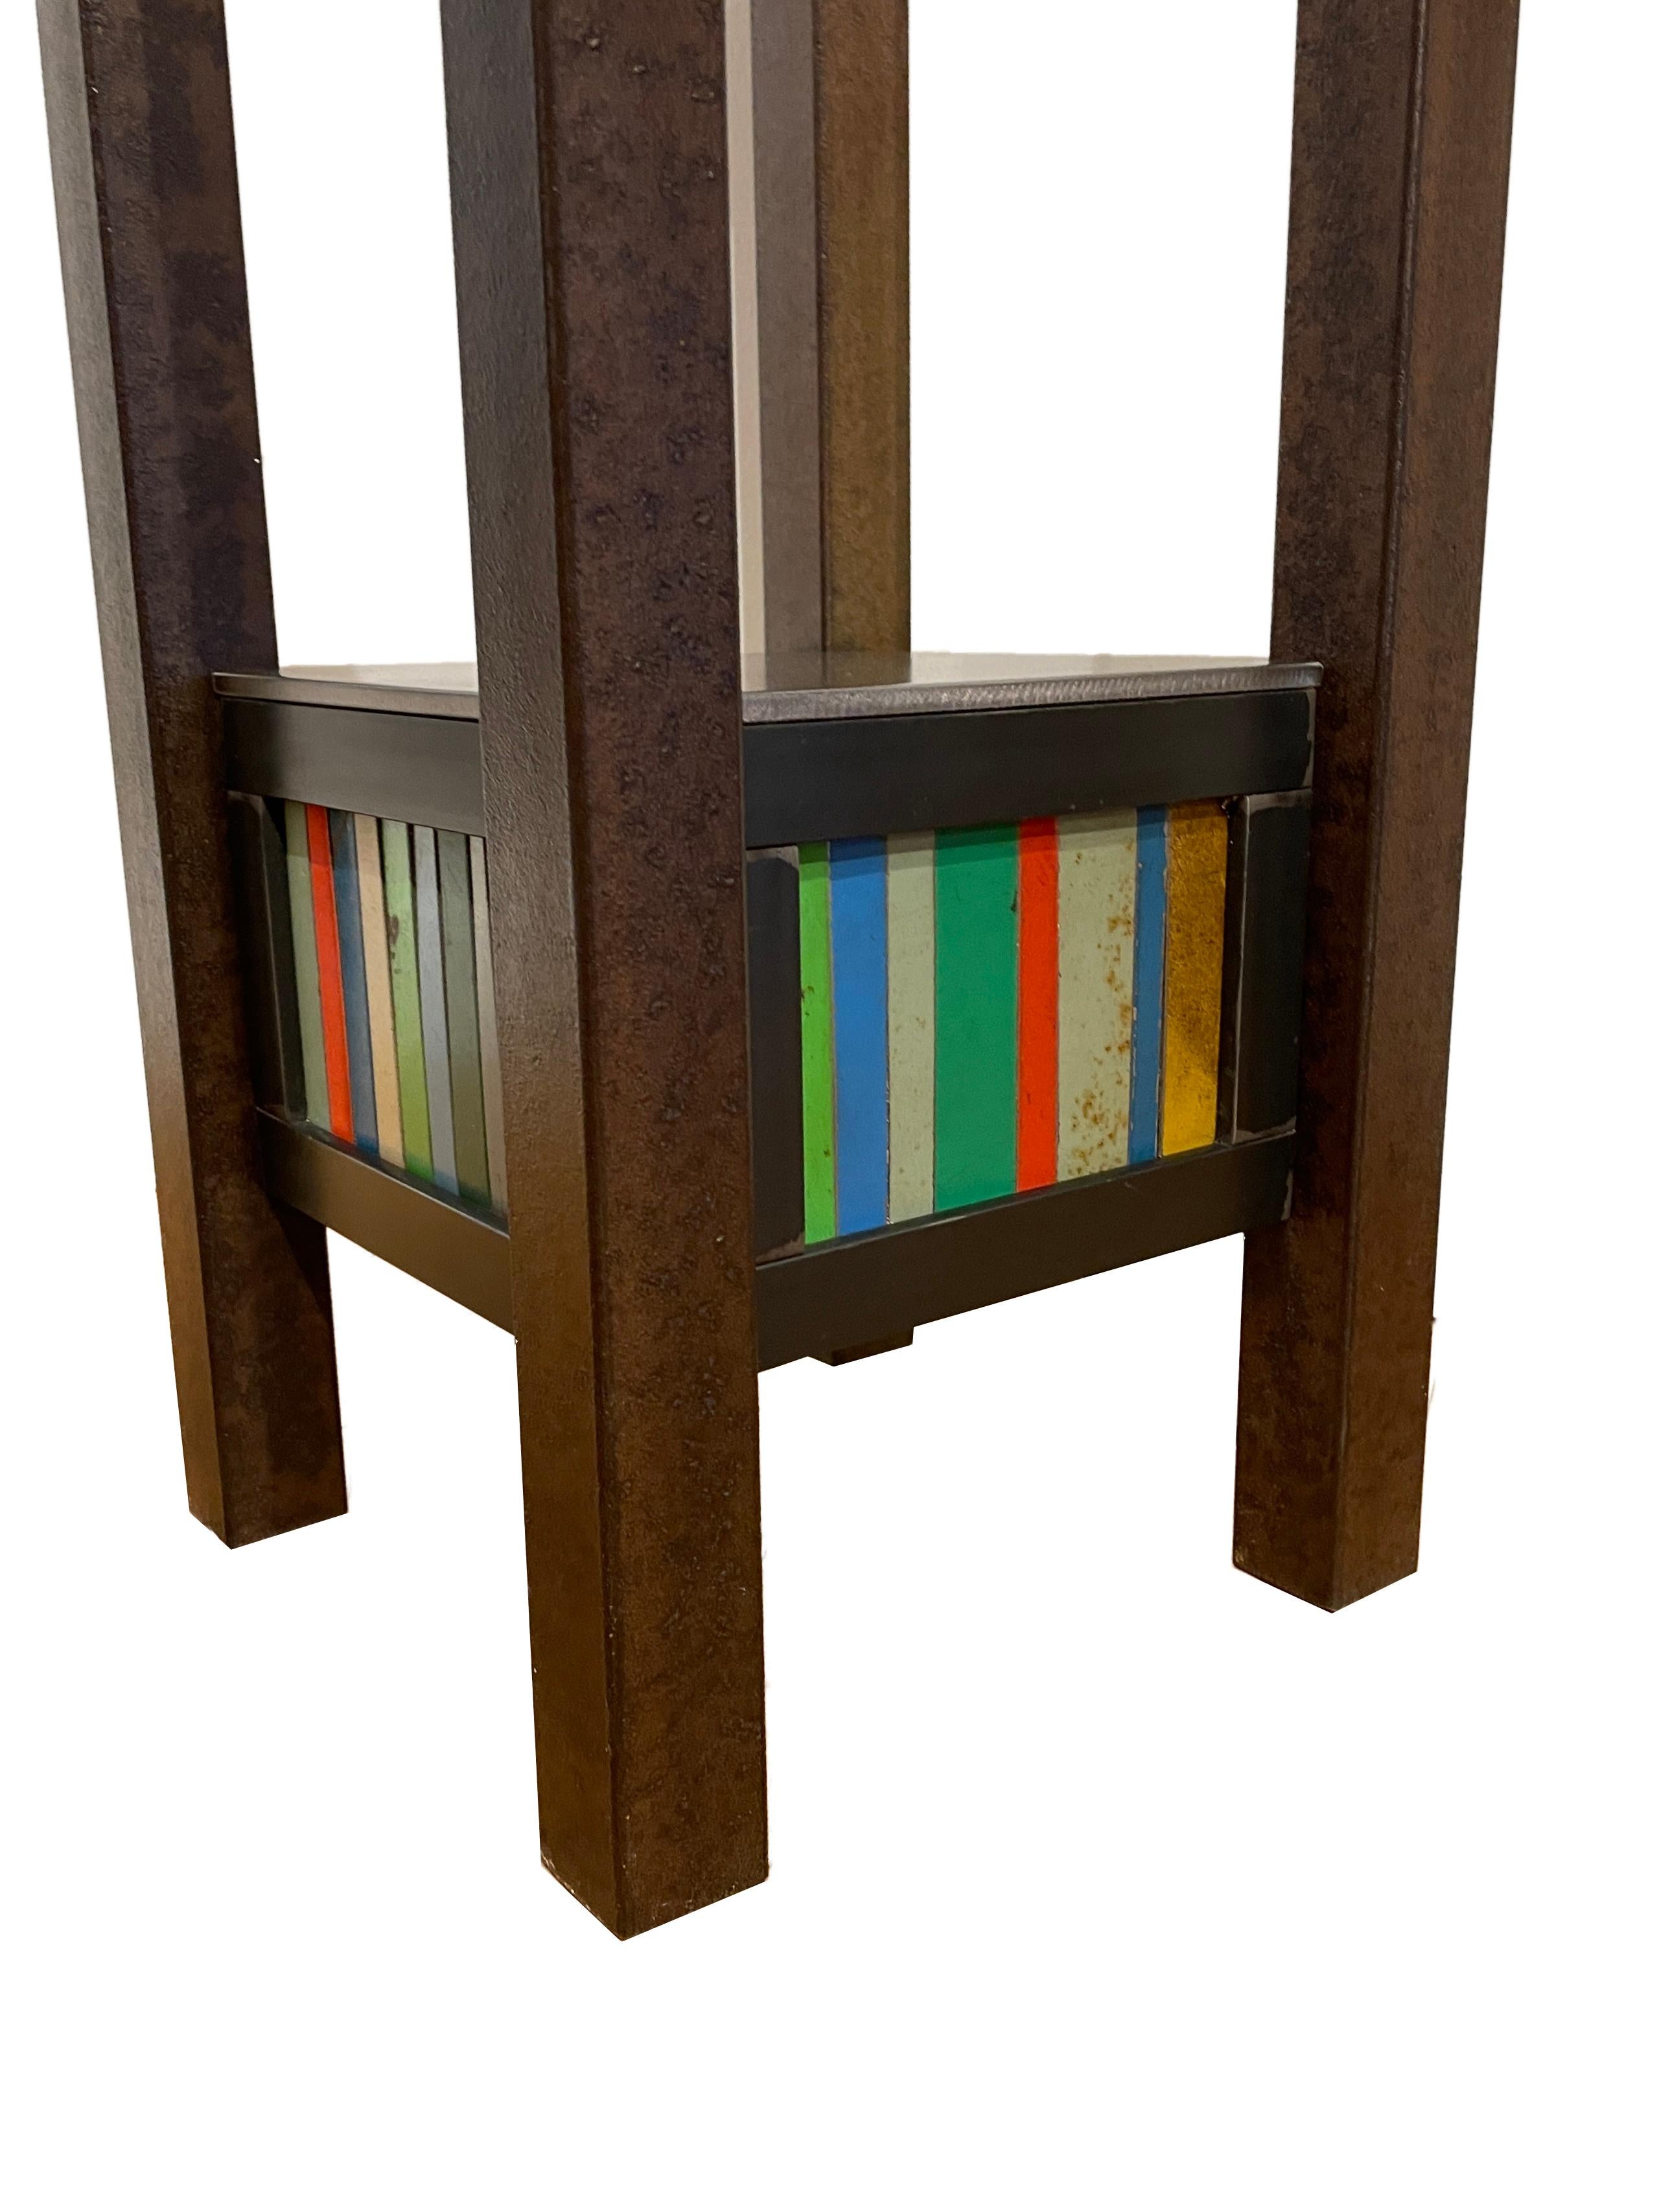 Contemporary Jim Rose Steel Pedestal, Welded Steel with Shelf, Brightly Colored Quilt Pattern